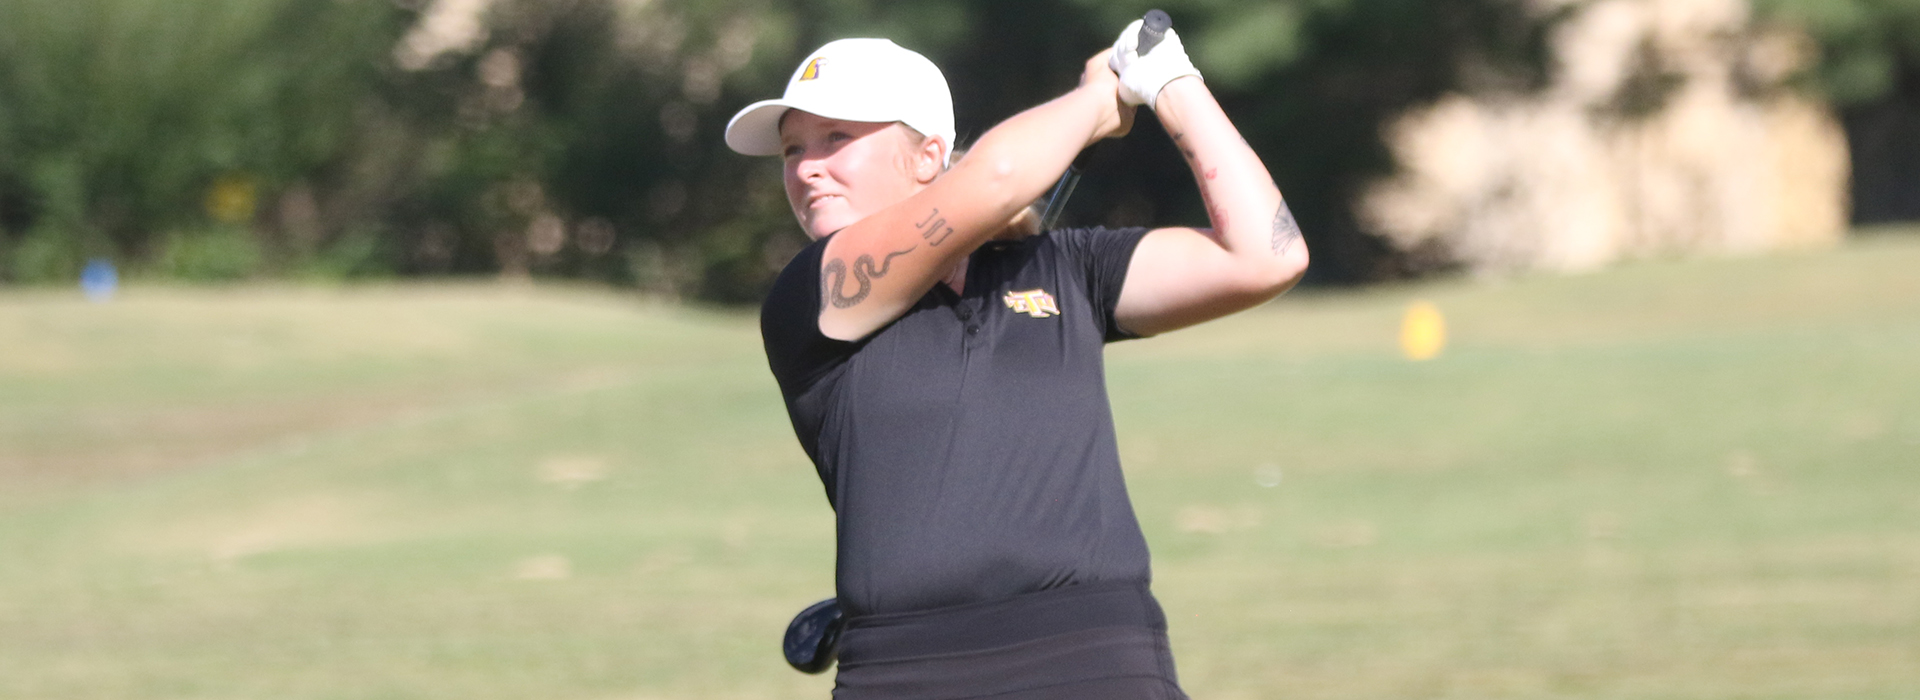 App State inches past Tech on final day of Oyster Shuck Match Play event